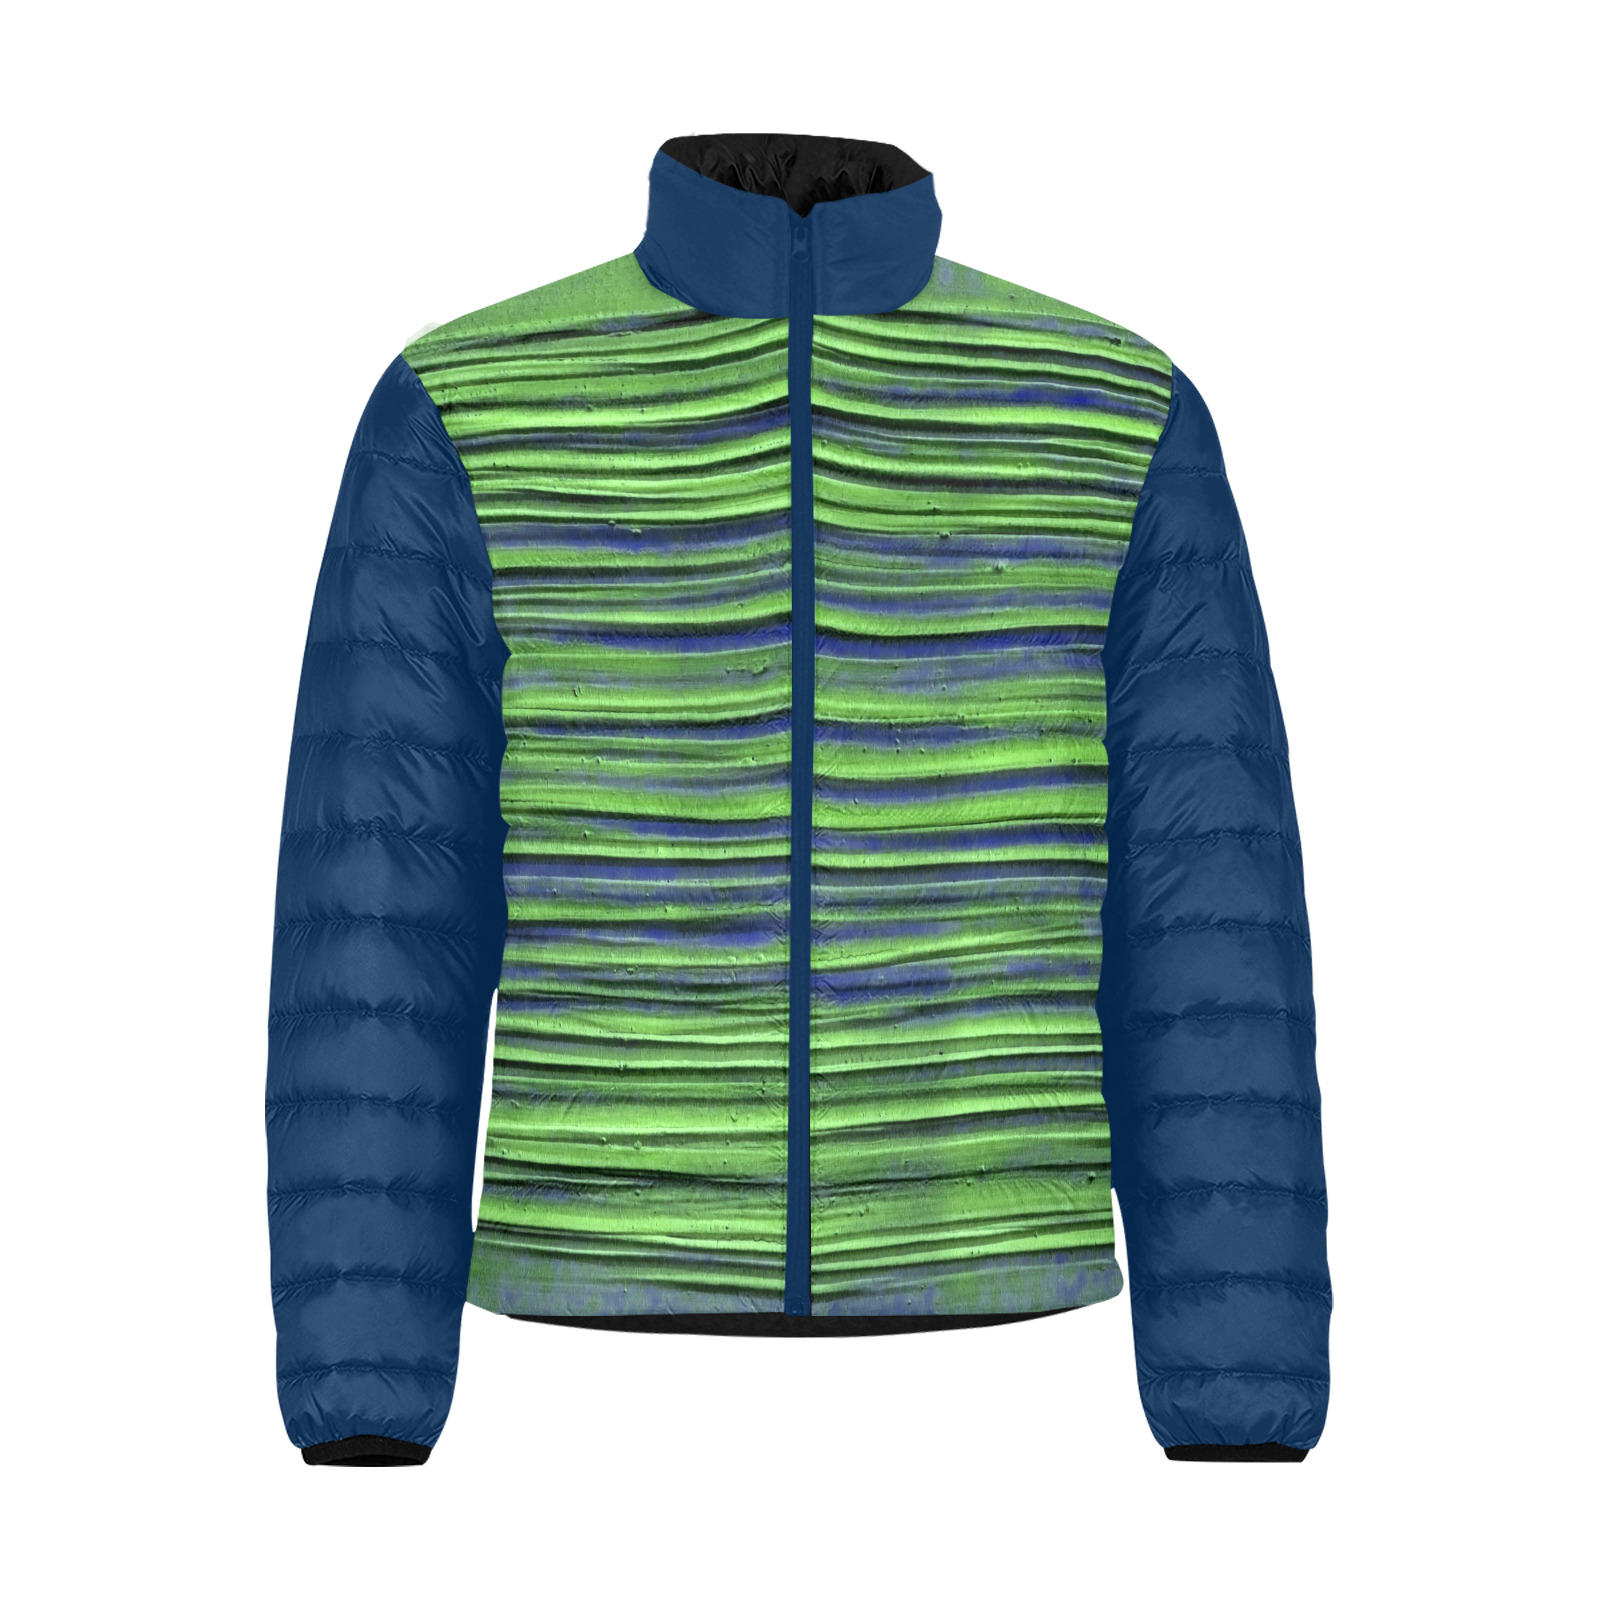 RETRO LINES GREEN BLUE Men's Stand Collar Padded Jacket (Model H41)